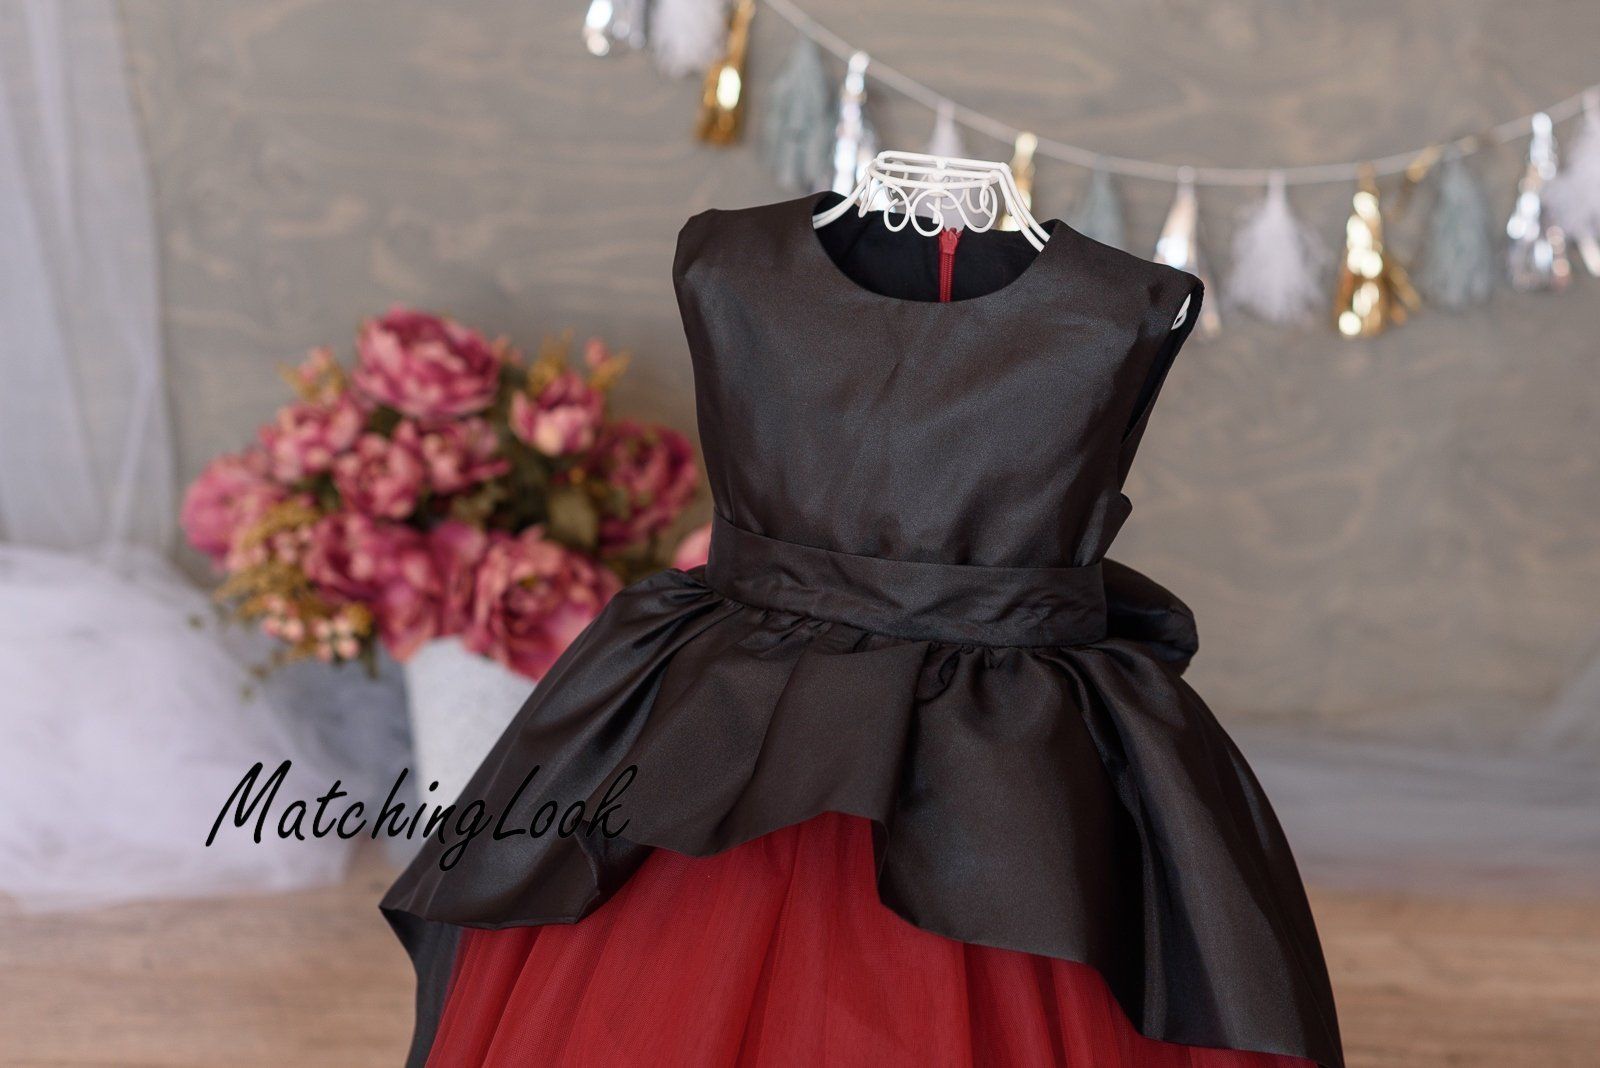 black gown for baby girl